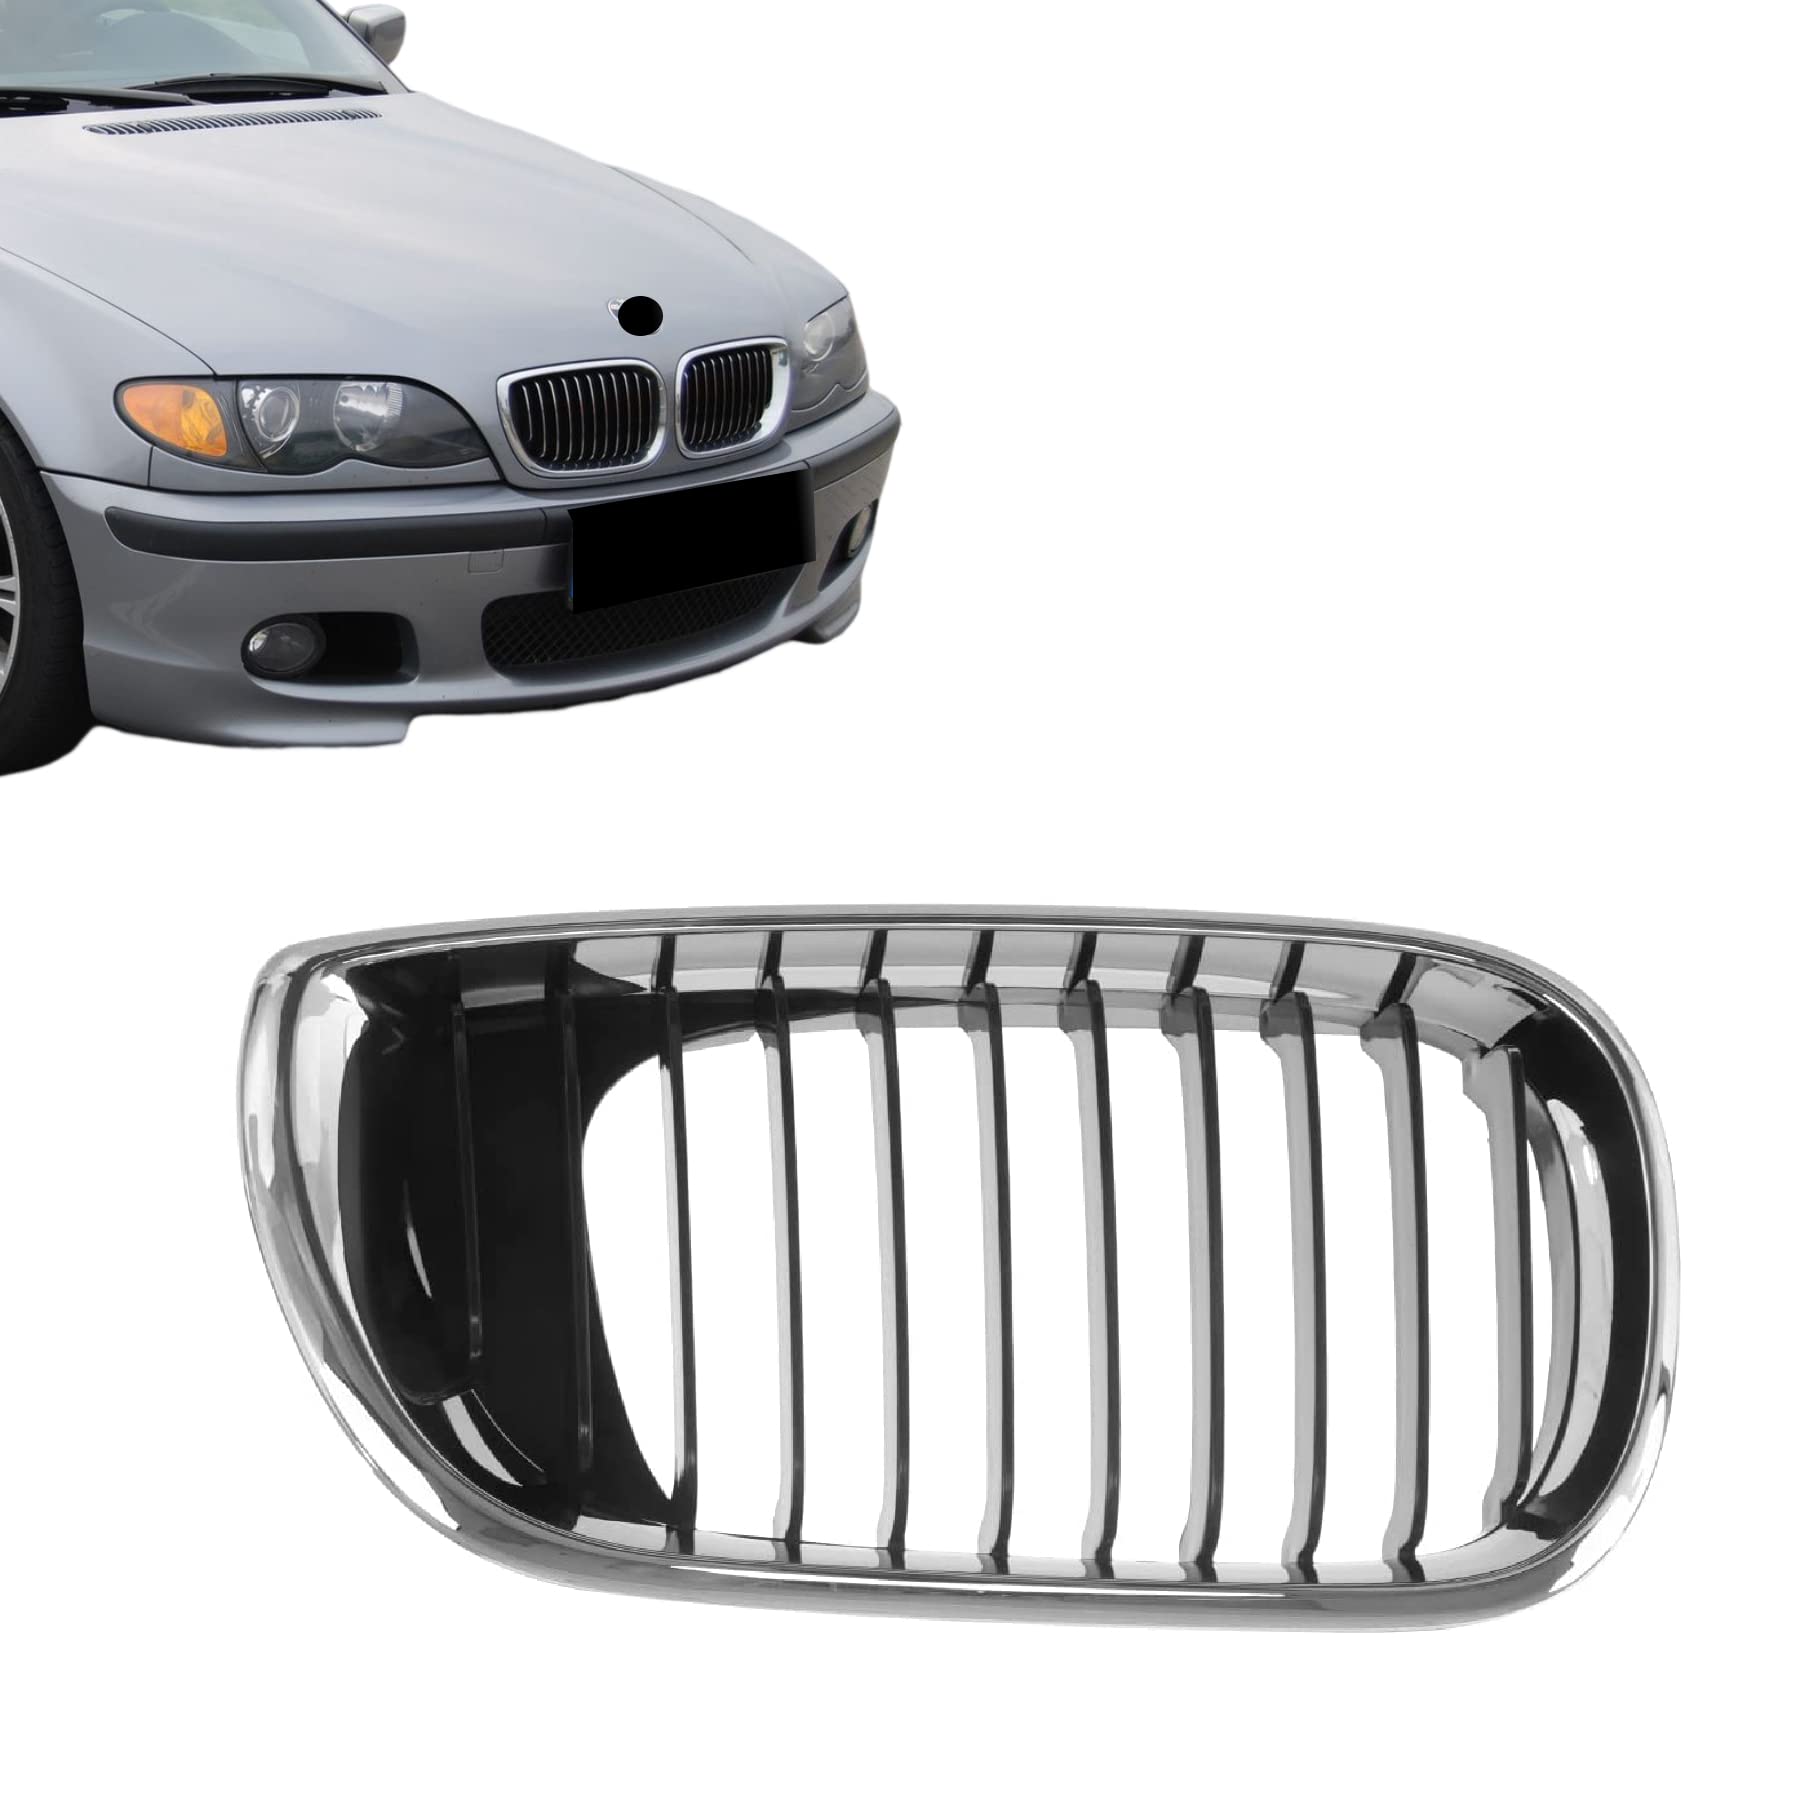 Amazon.com: CarPartsDepot Front Right Passenger Side Chrome Outer Frame  Grille Grill Black Inner Insert for 2002-2005 BMW 325i 325xi 330i 330xi  RHBM1200127 51137030546 : Automotive